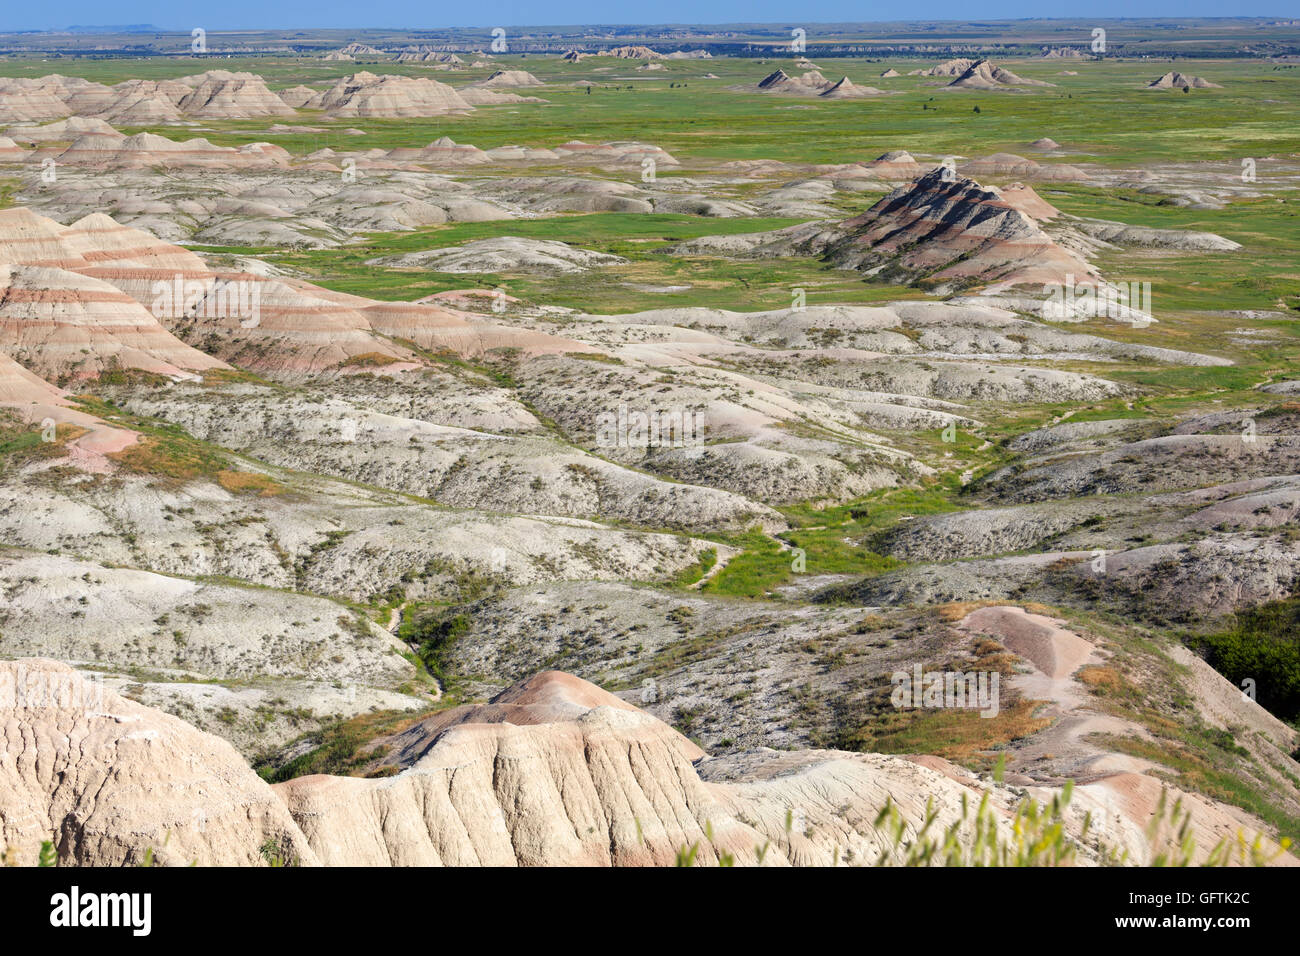 White River Valley, Badlands National Park, South Dakota. From the overlook one can see the Rim area and prairie to the south, w Stock Photo